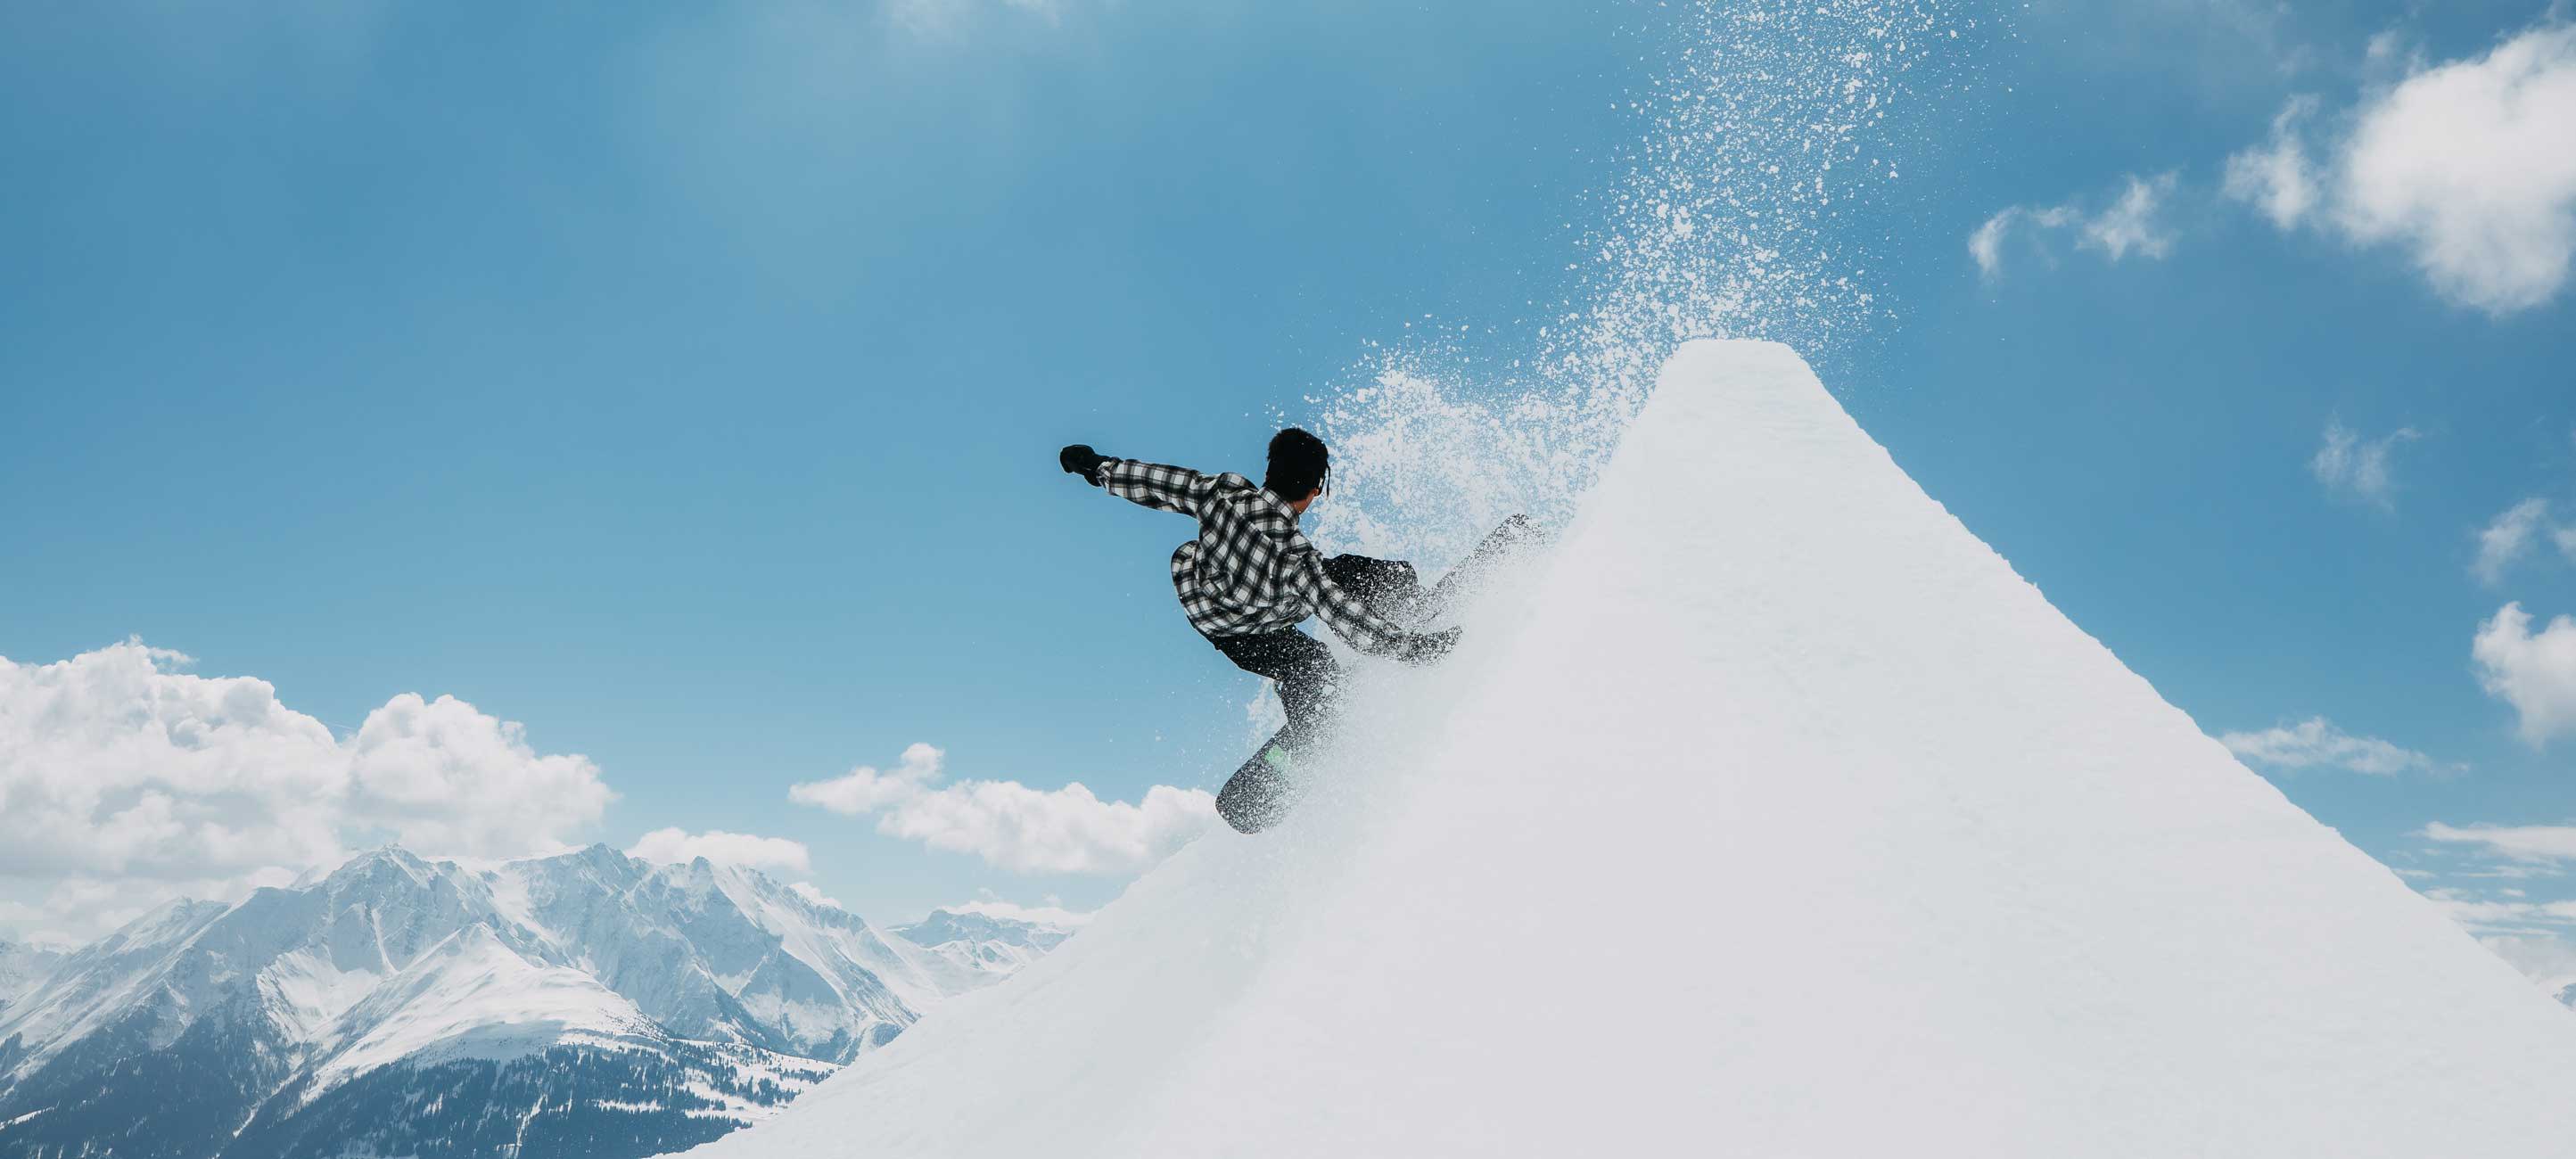 Gift Ideas for Snowboarders